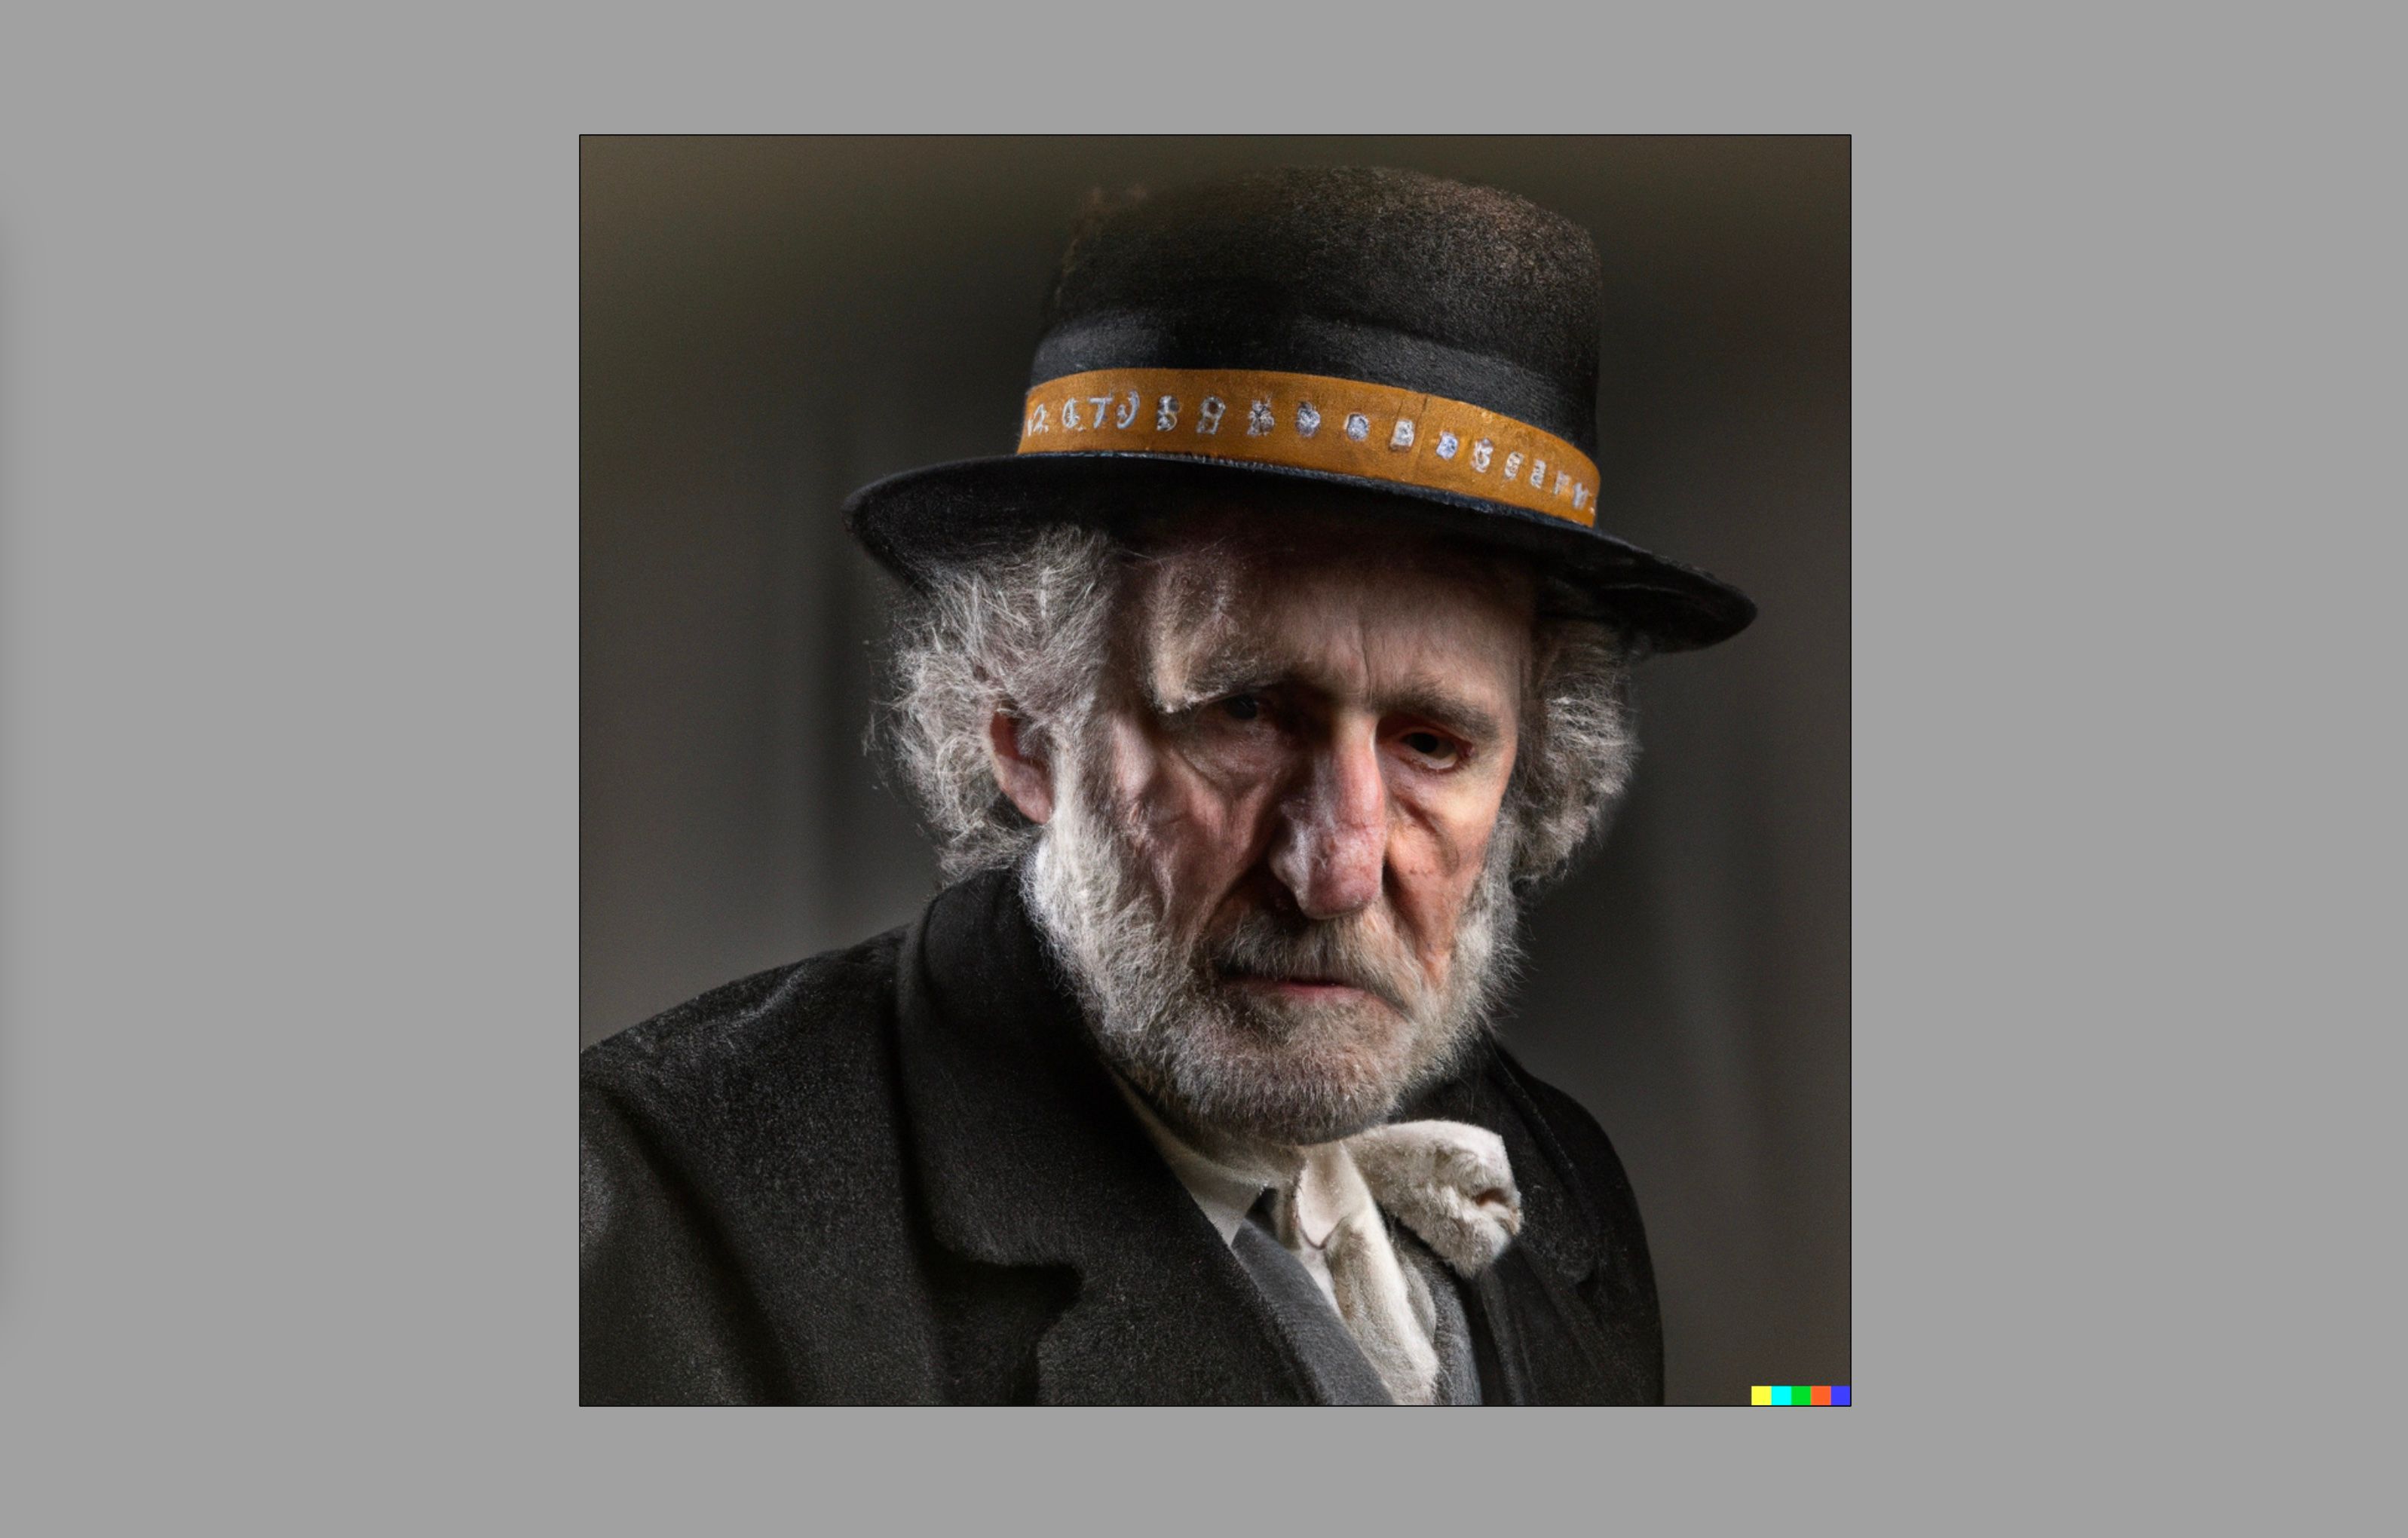 Photorealistic portrait of a man in a hat, generated with Dall-E